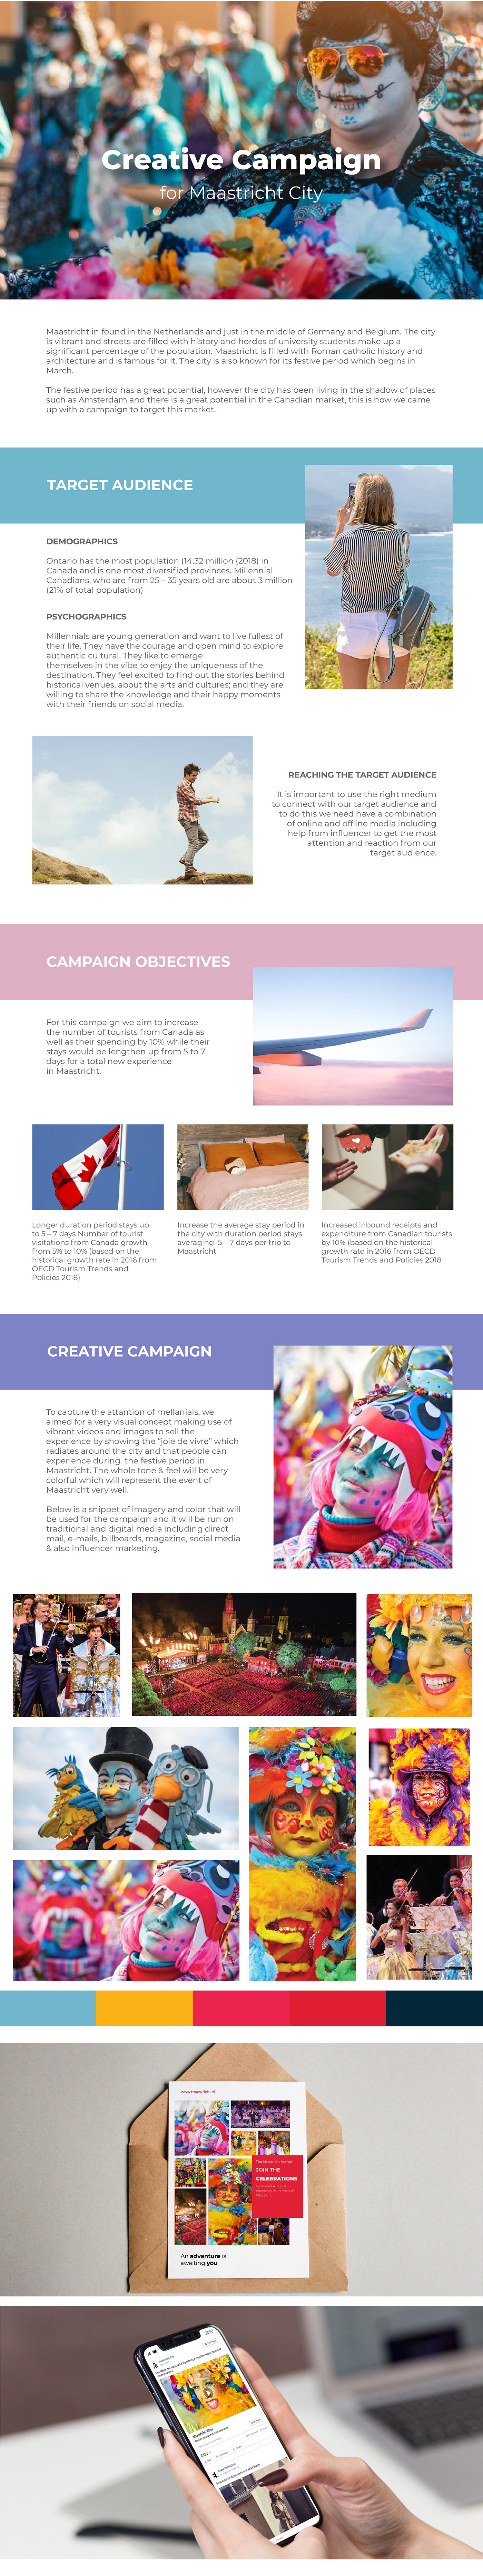 creative Creative Campaign campaign marketing   Marketing Research graphic design  Experience festival Layout